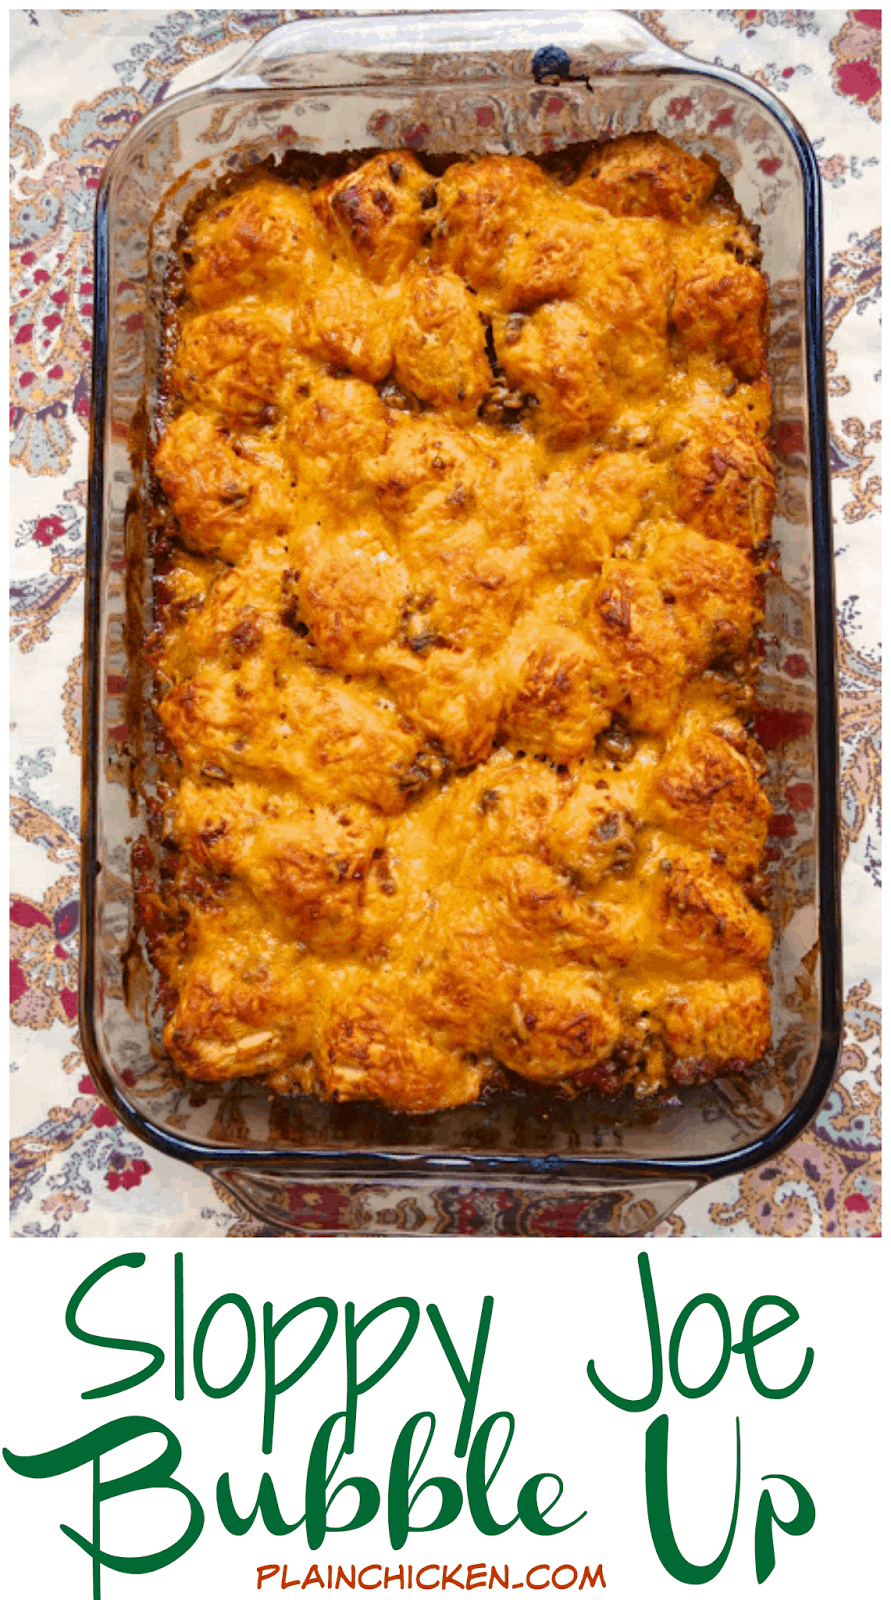 Sloppy Joe Bubble Up - homemade sloppy joe mixture tossed with chopped refrigerated biscuits and topped with cheese. Great twist to your usual sloppy joes. Tastes great! Even picky eaters like this casserole!!